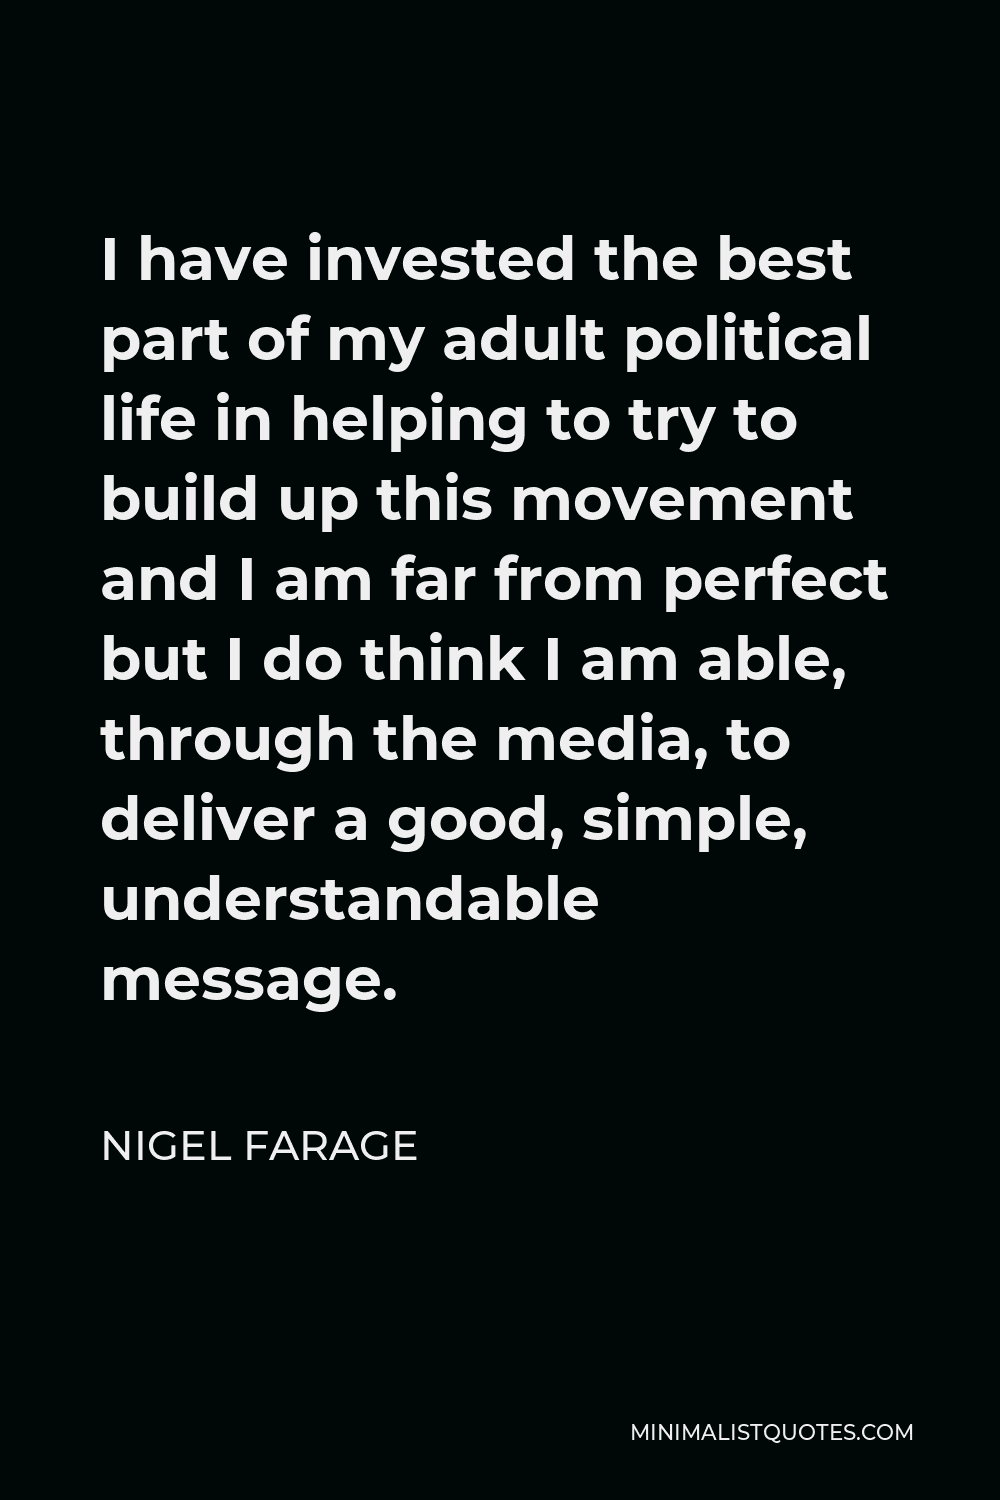 Nigel Farage Quote - I have invested the best part of my adult political life in helping to try to build up this movement and I am far from perfect but I do think I am able, through the media, to deliver a good, simple, understandable message.